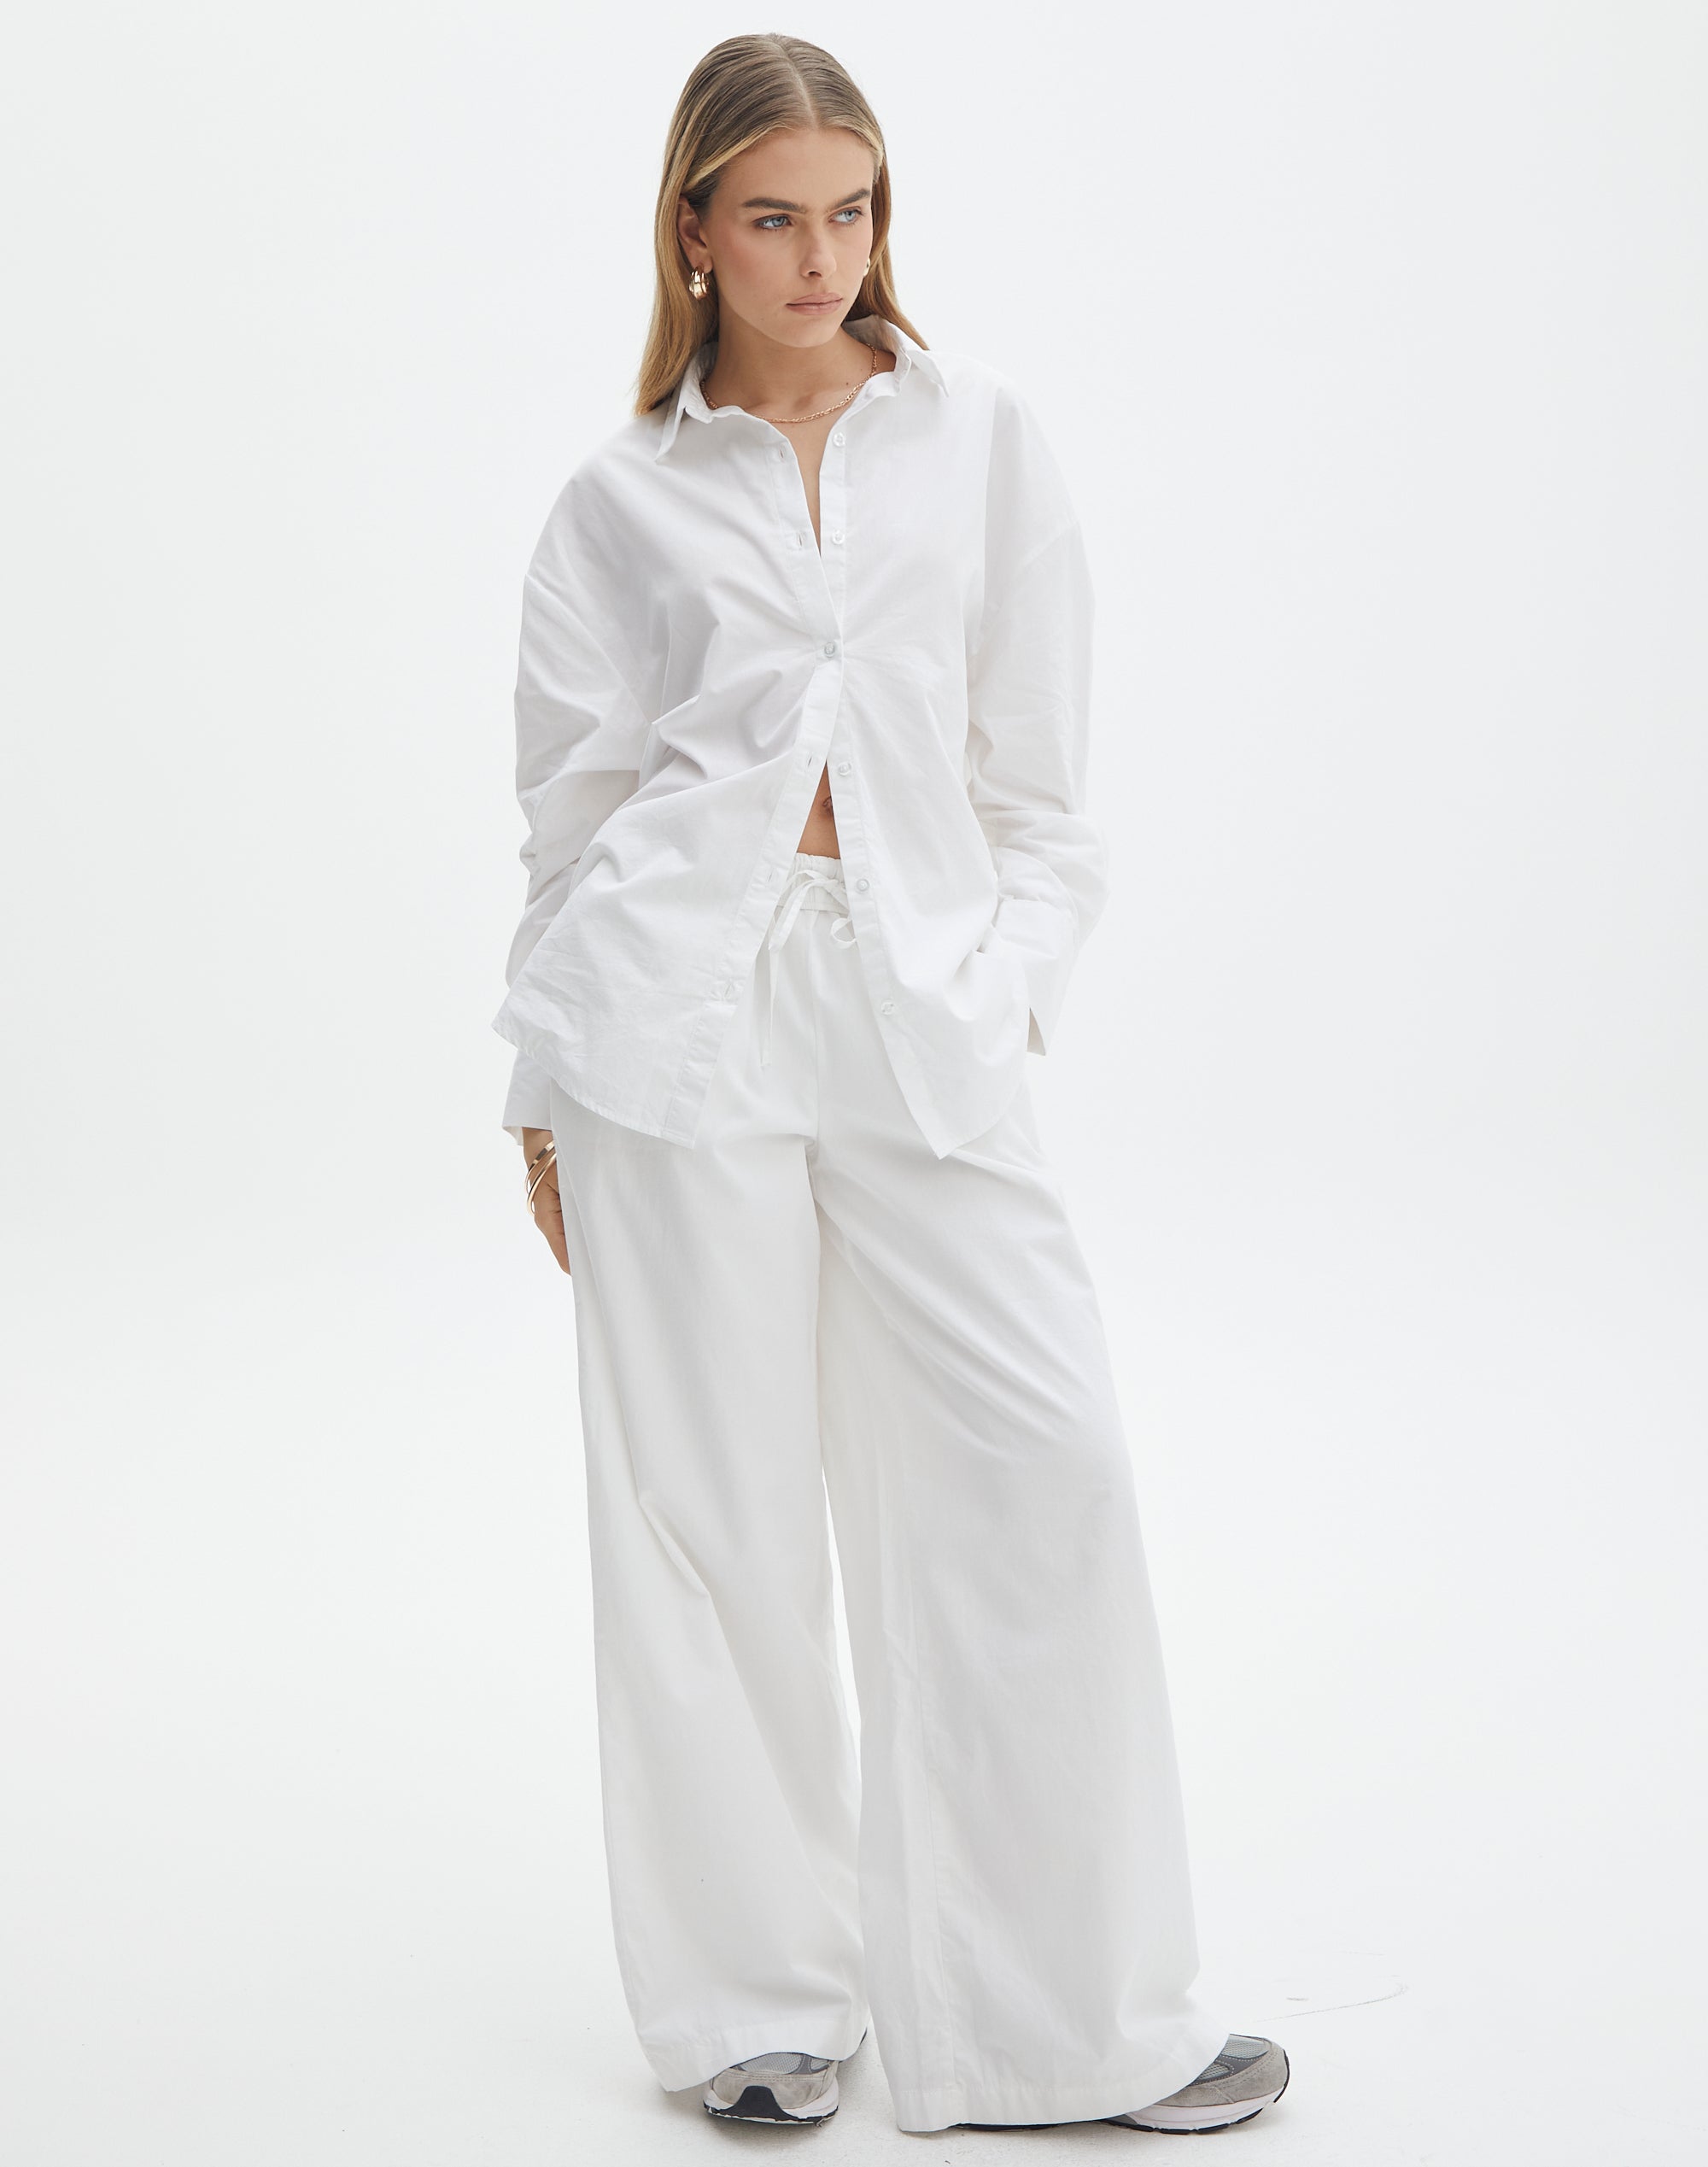 JDY by ONLY Blue Flat Front Wide Leg Pants